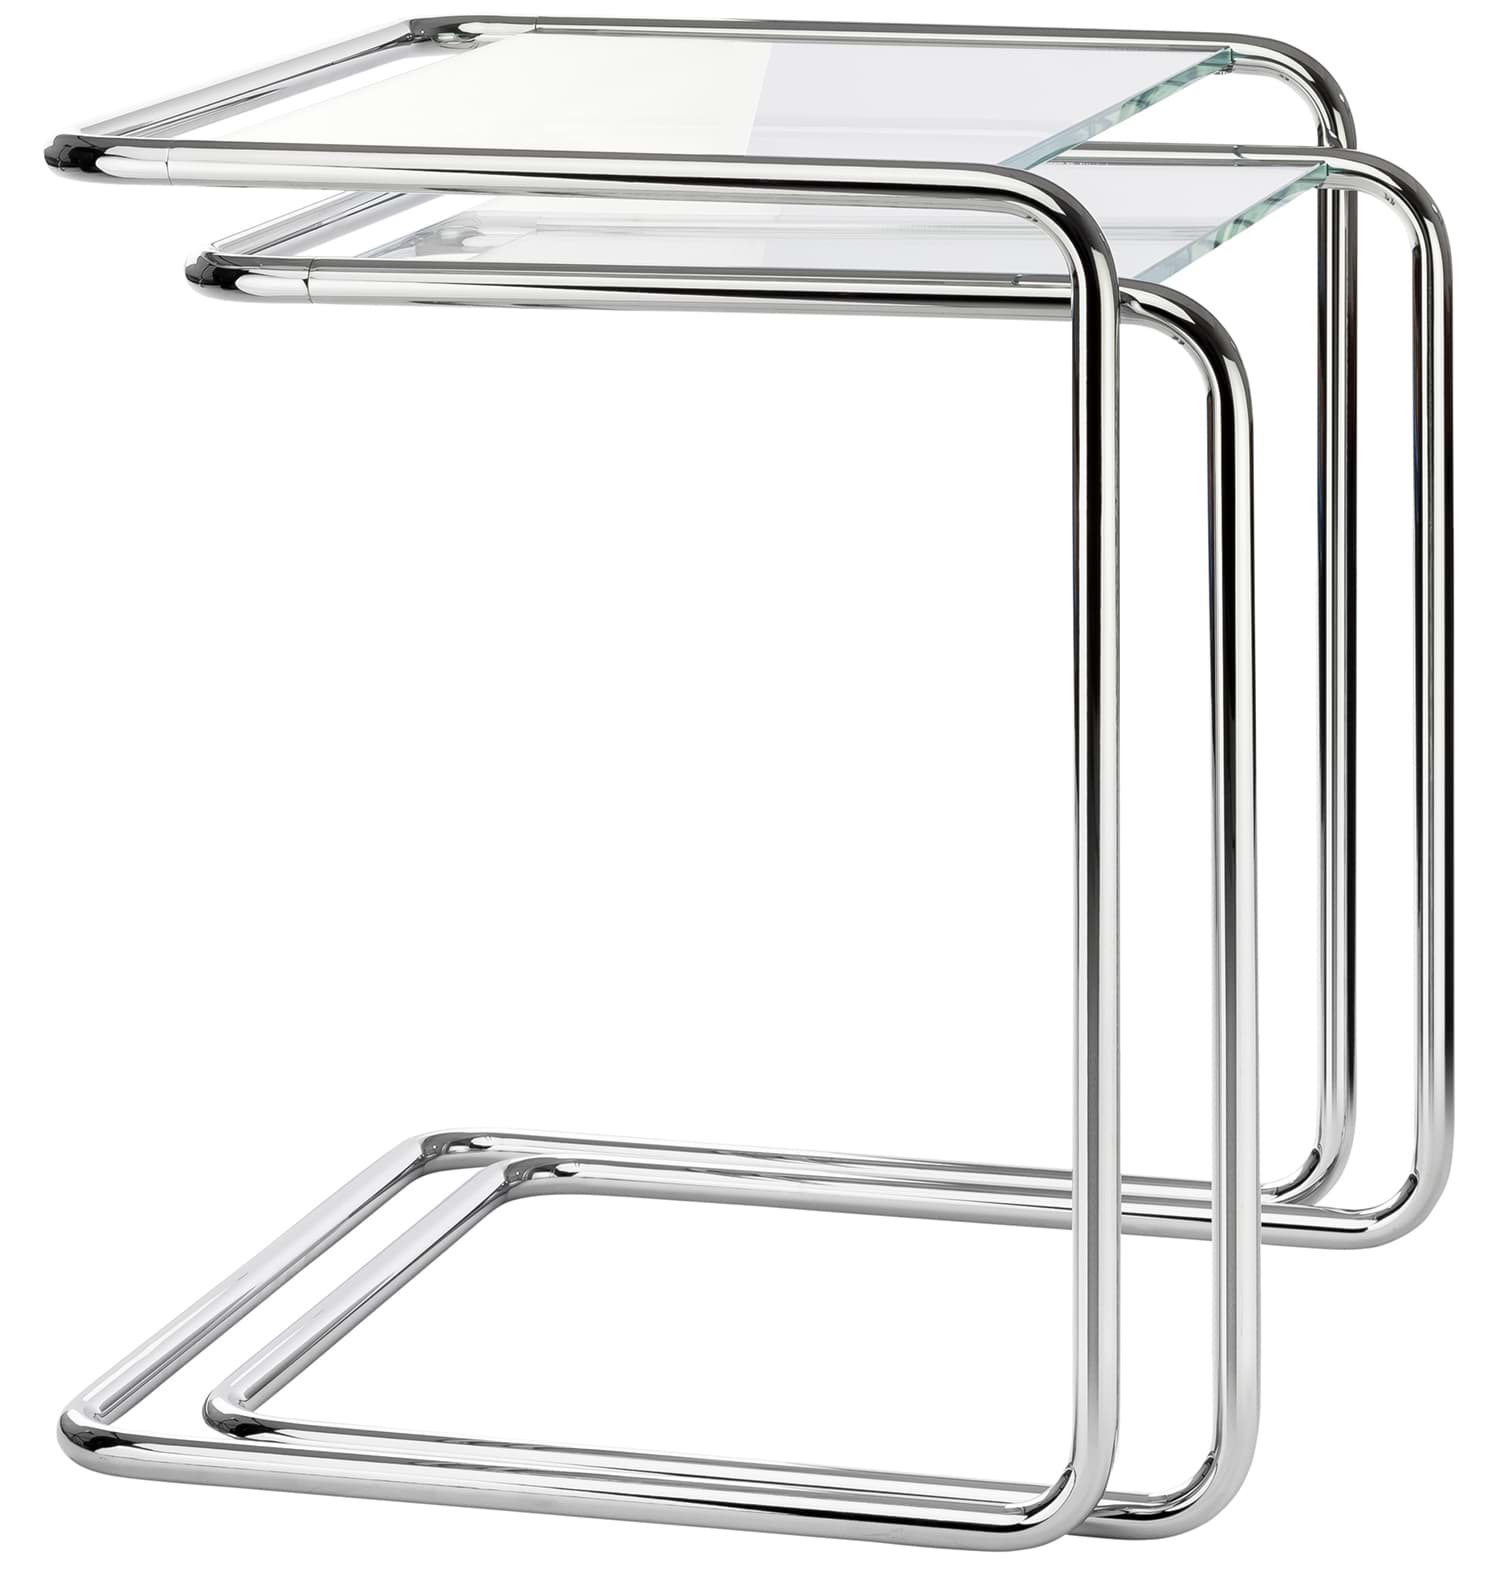 Picture of B 97 Nesting Tables 